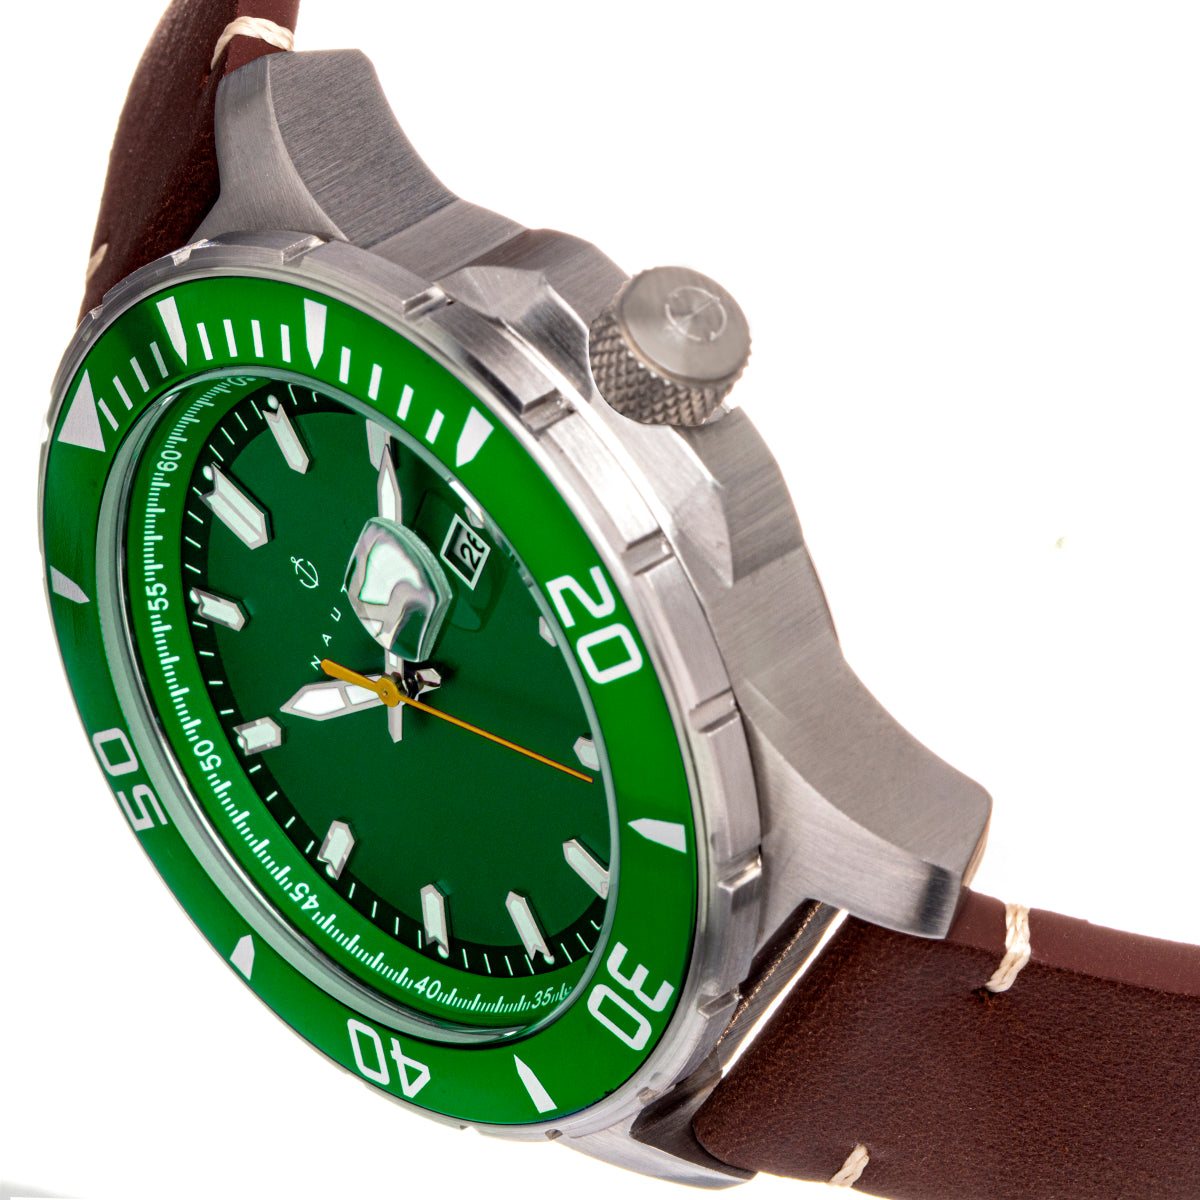 Nautis Dive Pro 200 Leather-Band Watch w/Date - Green - GL1909-F